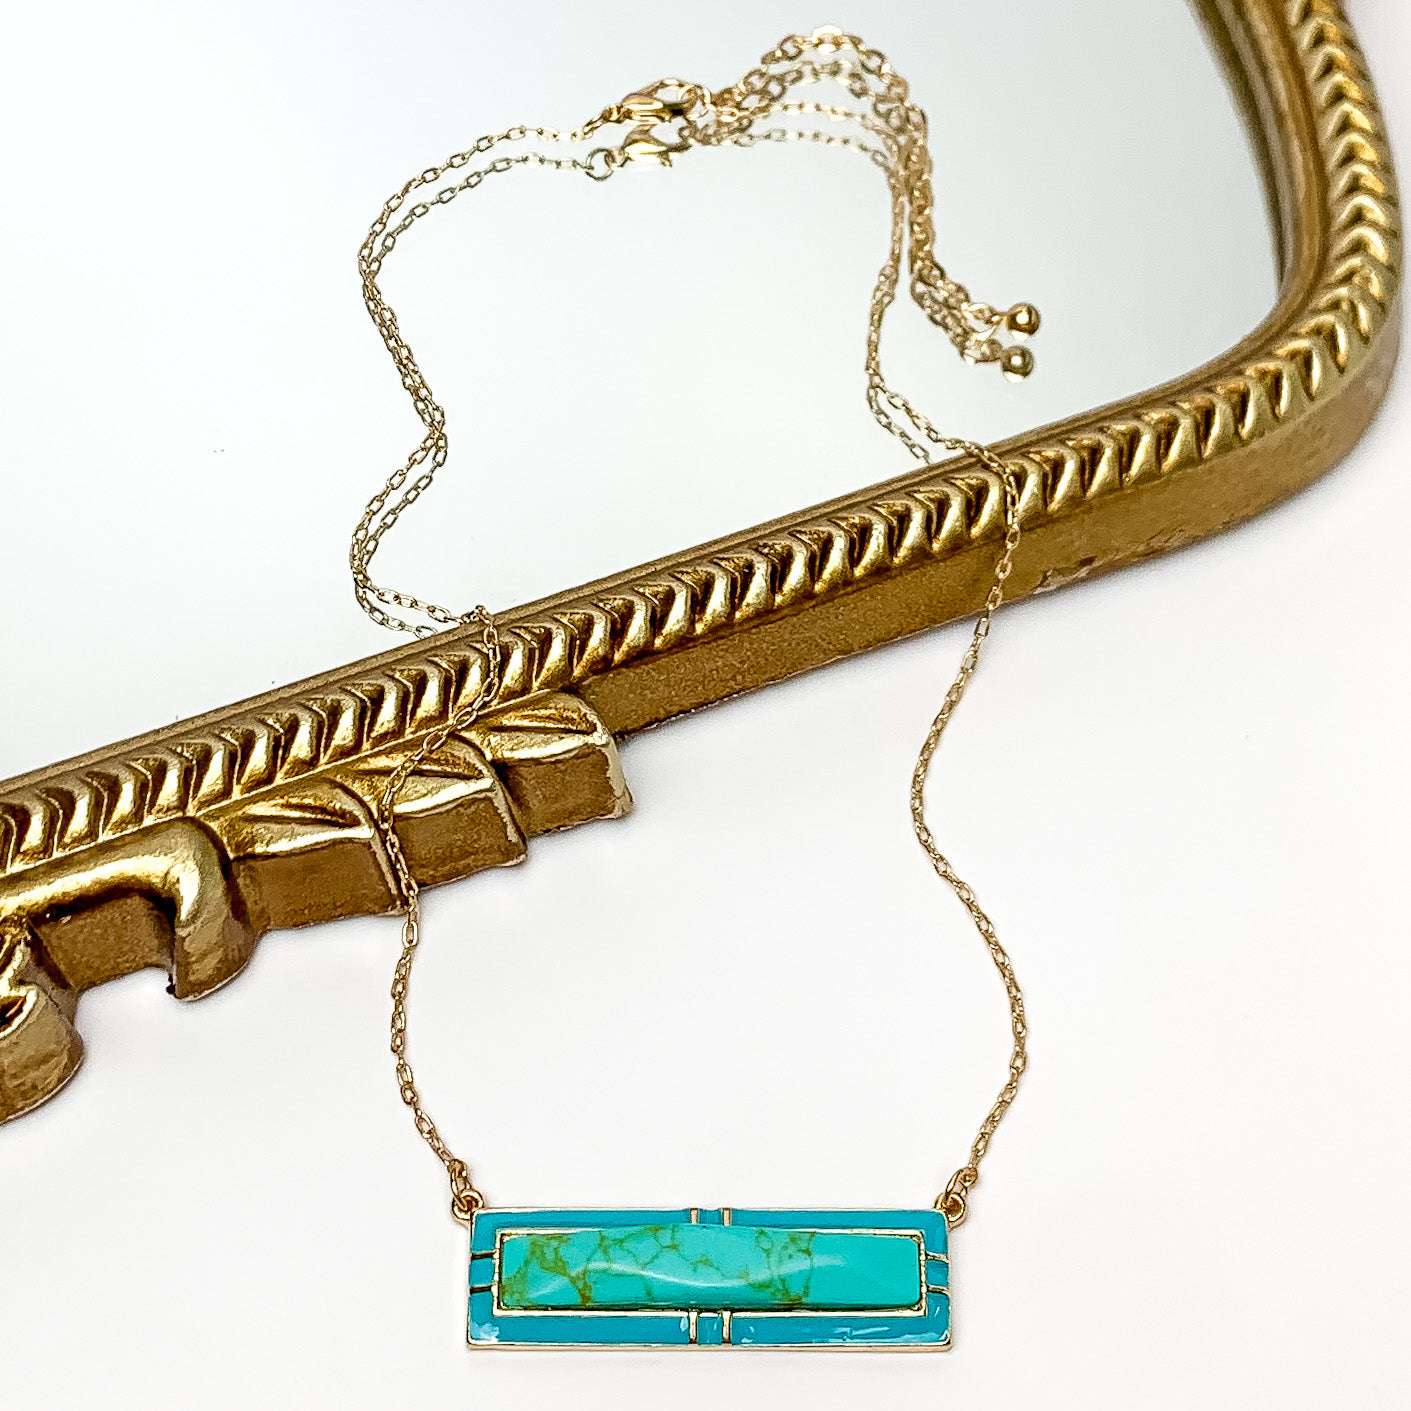 Everyday Gold Tone Chain Necklace With Rectangular Pendant in Turquoise - Giddy Up Glamour Boutique